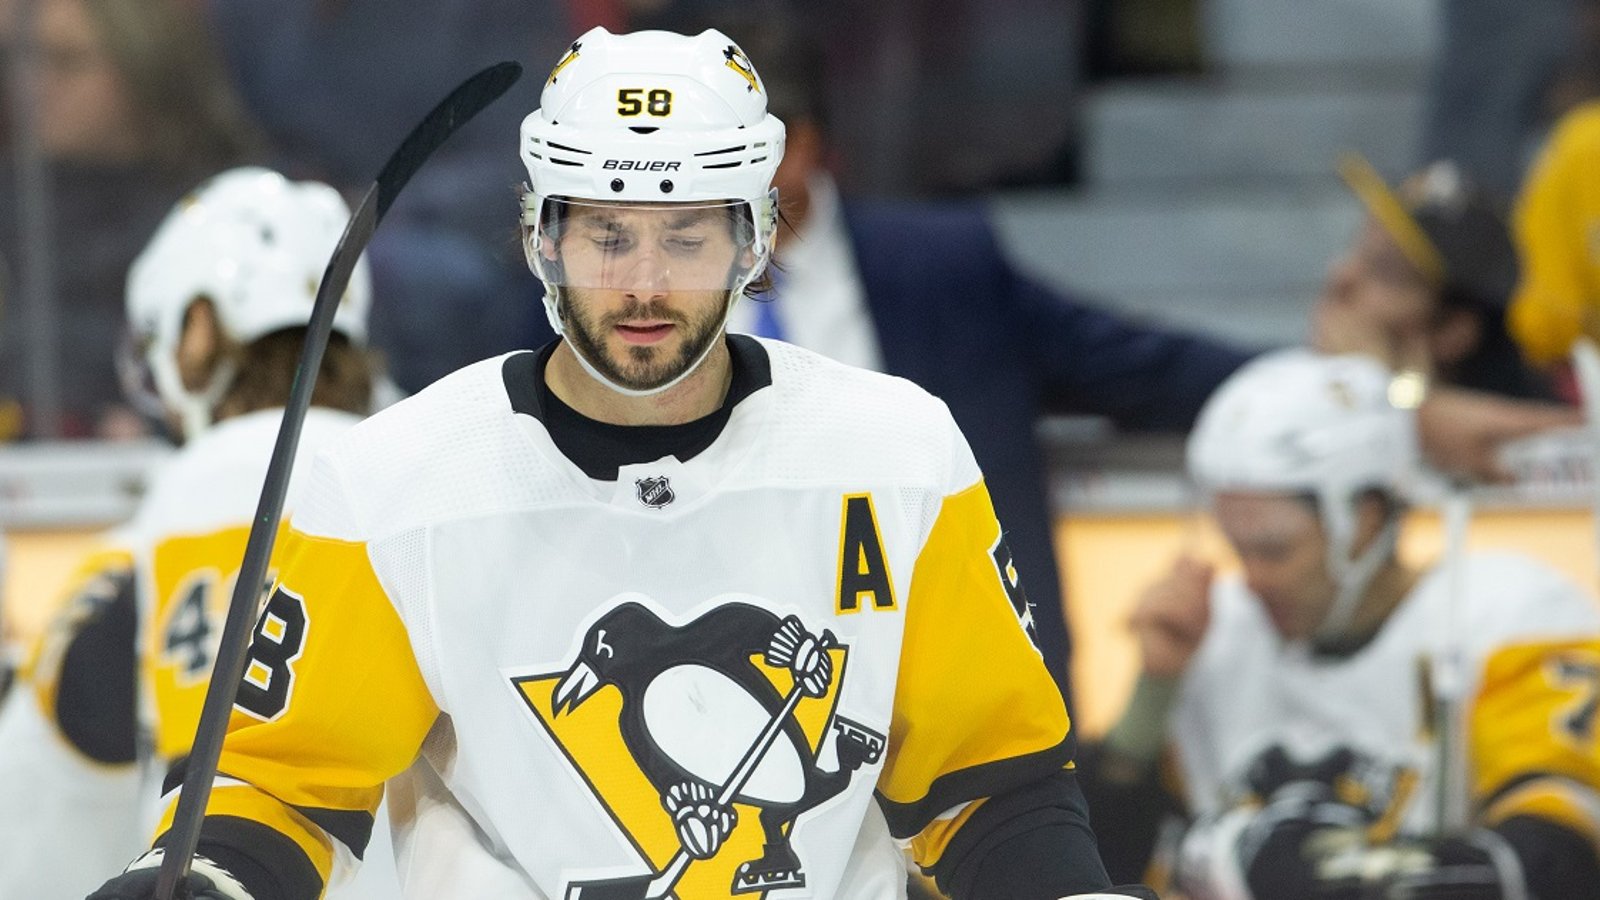 Penguins lose 2 core players in Stadium Series game vs the Flyers.